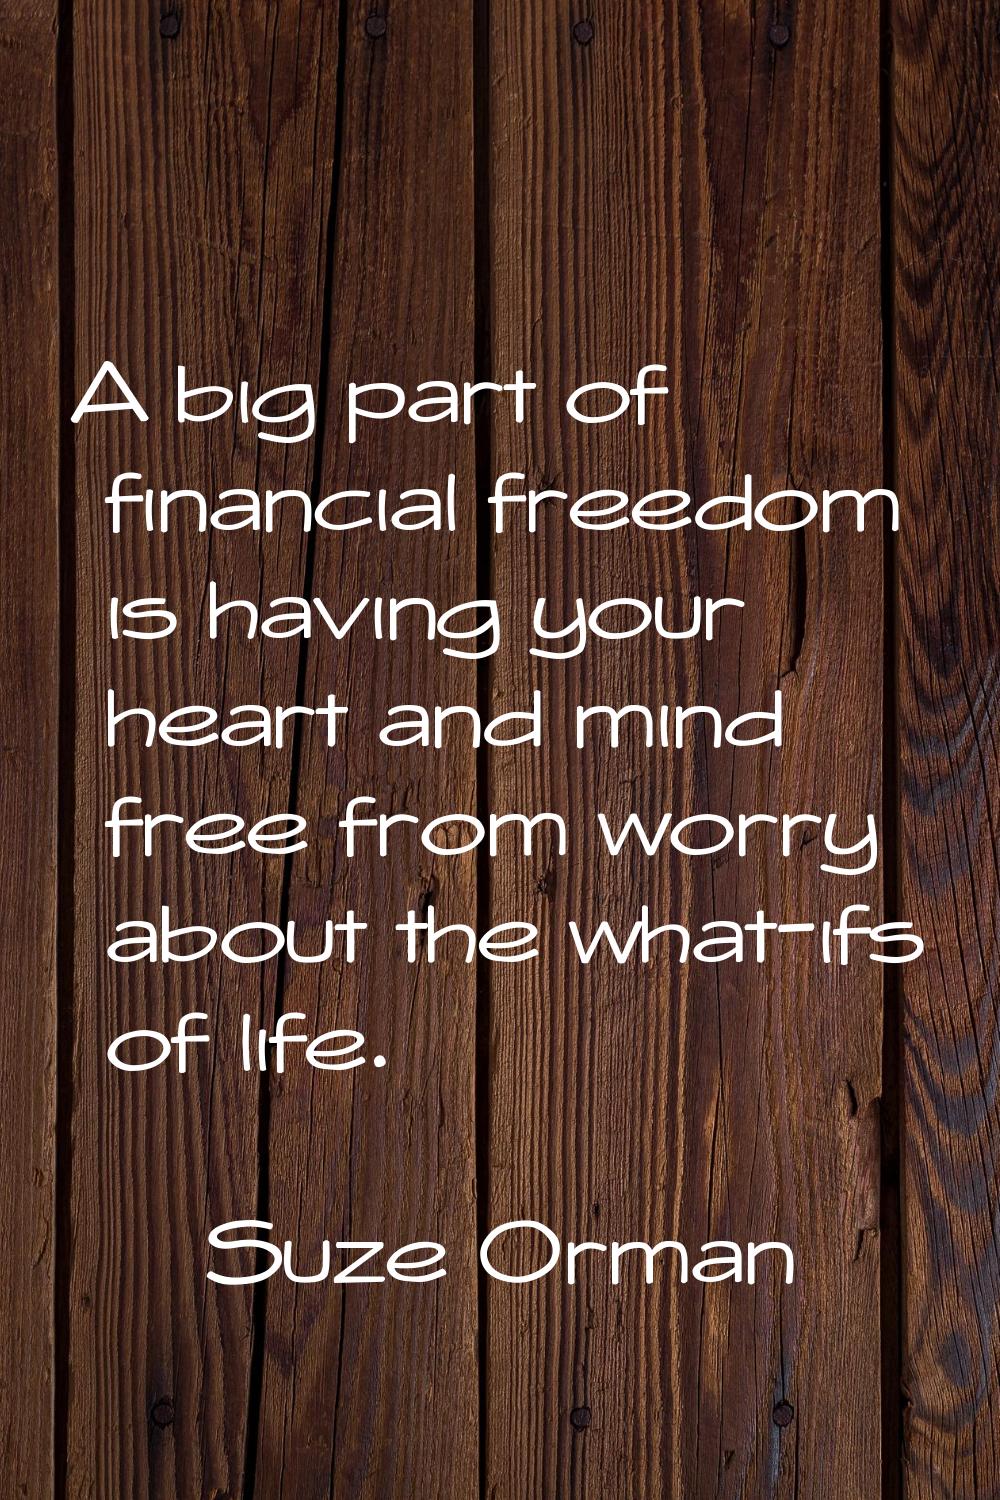 A big part of financial freedom is having your heart and mind free from worry about the what-ifs of